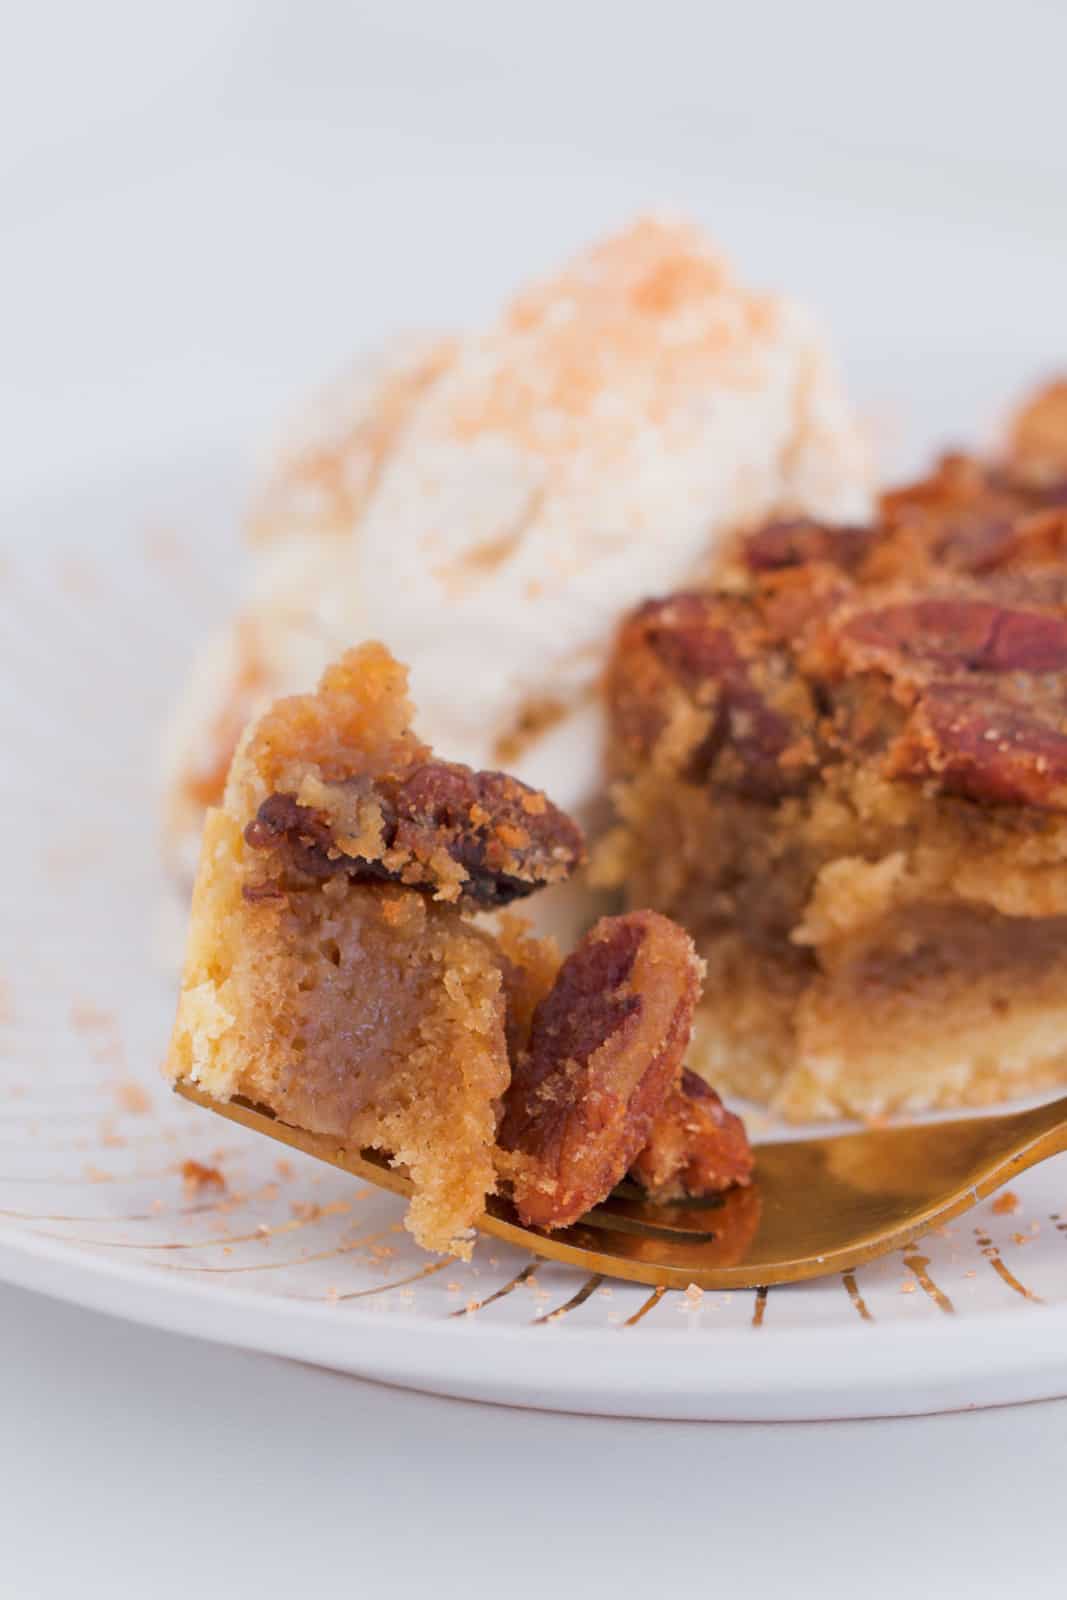 A piece of caramel pecan pie on a gold fork with ice-cream in the background.